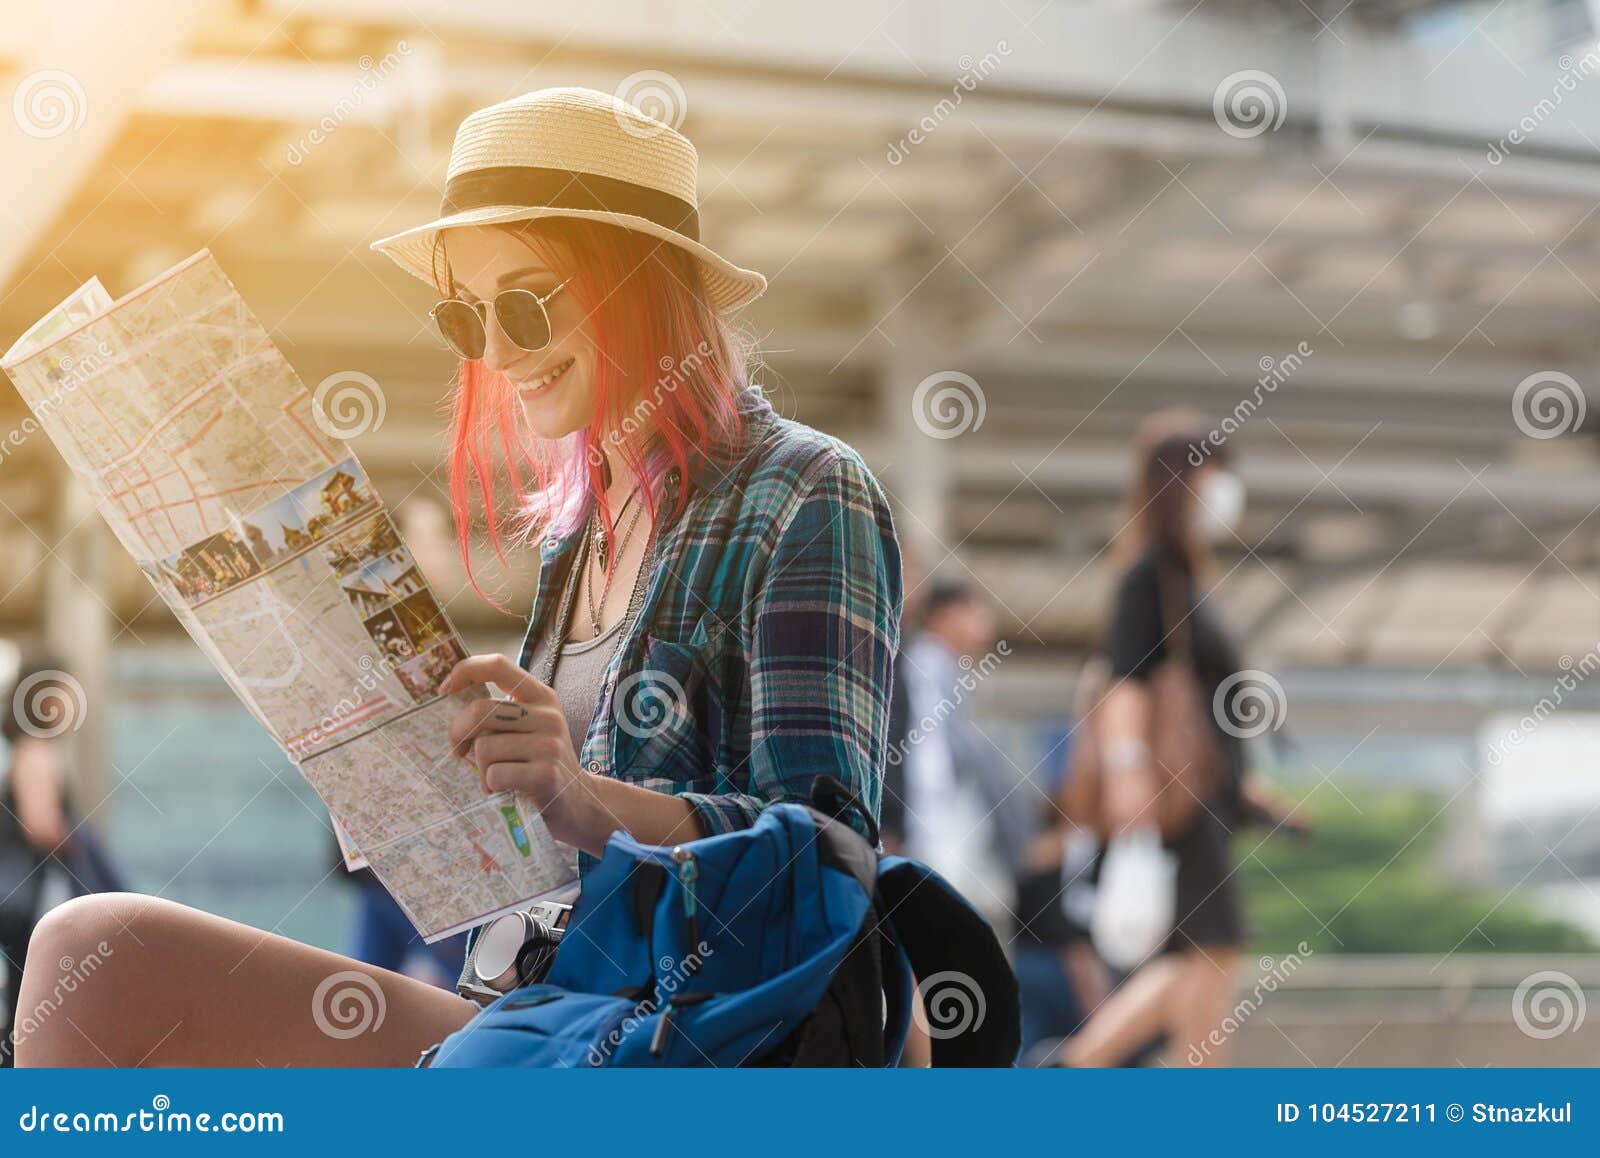 woman westerner looking at map during city tour in the morning,